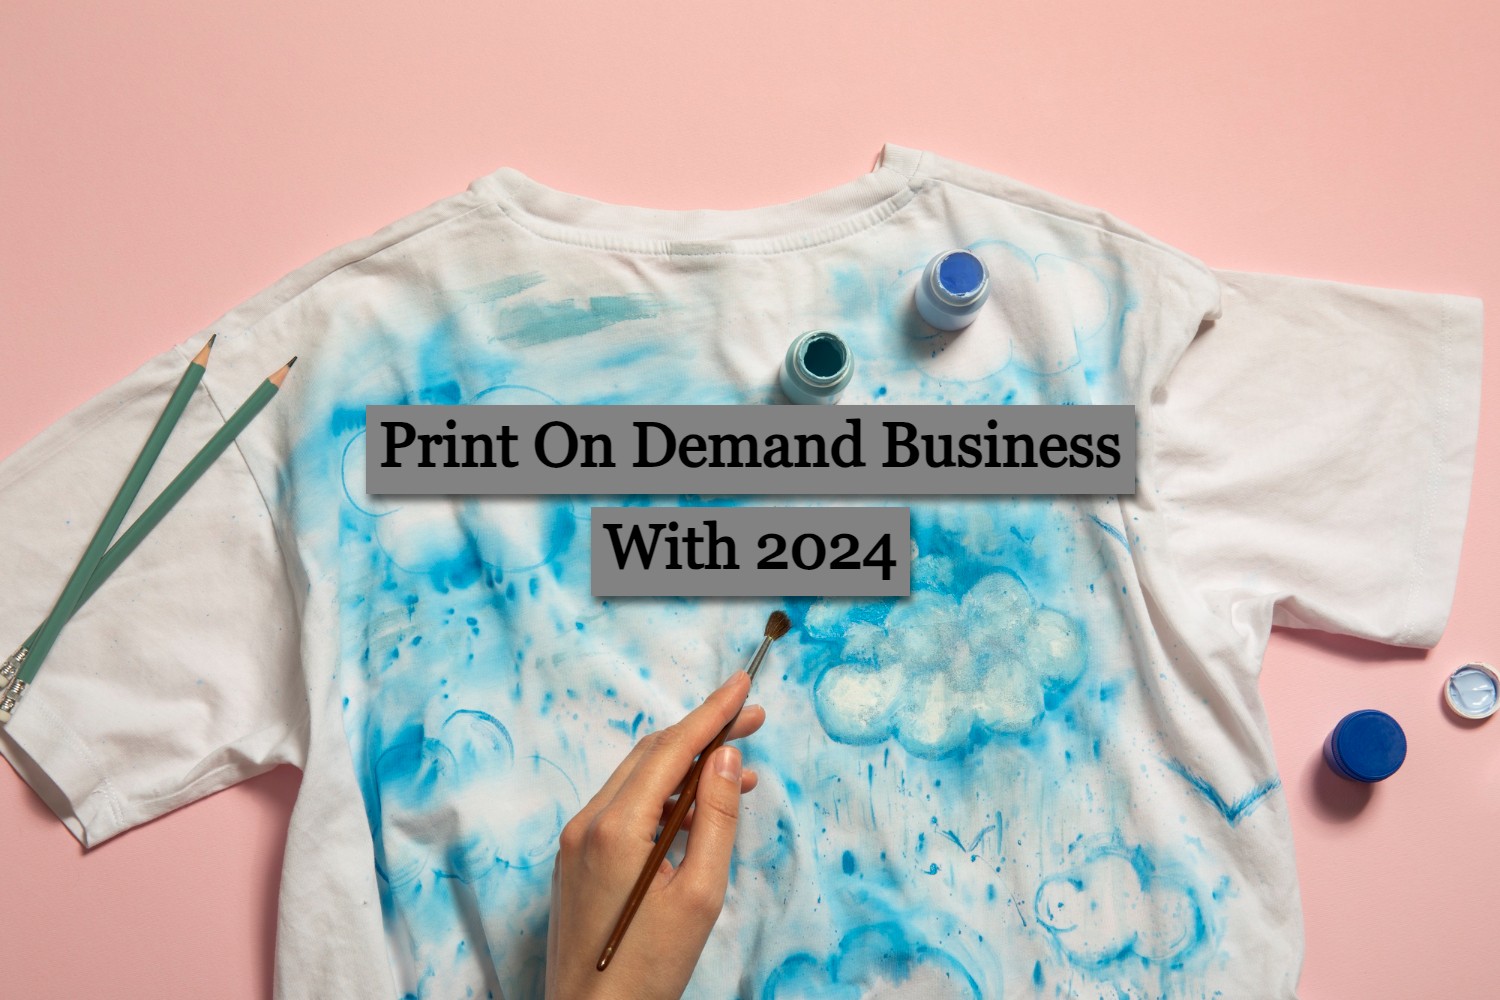 The Future of Print on Demand Business In 2024